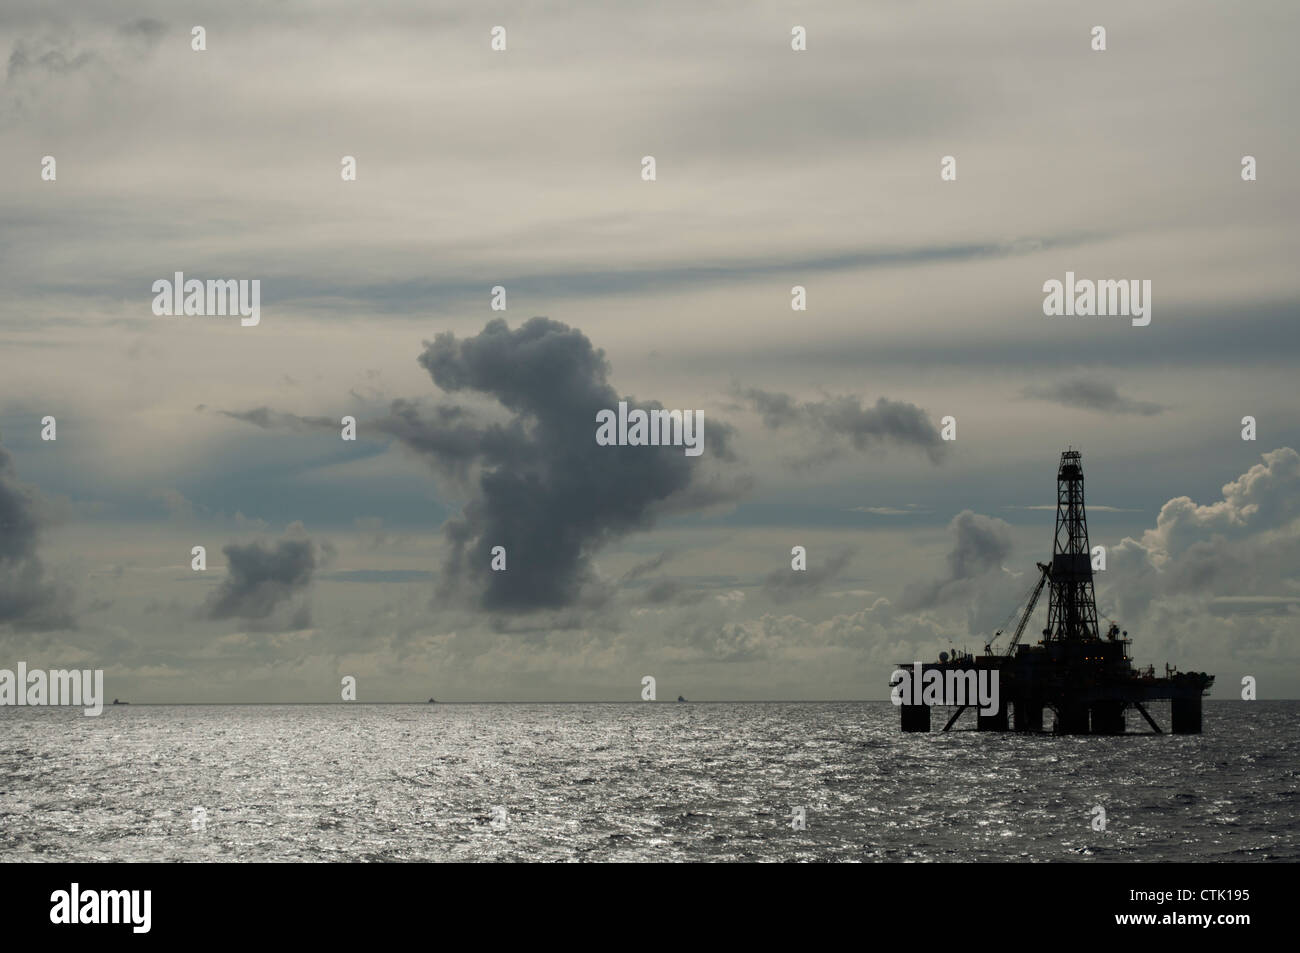 Silhouette of an Offshore floating oil drilling rig platform.  Clouds in dusk day. Stock Photo